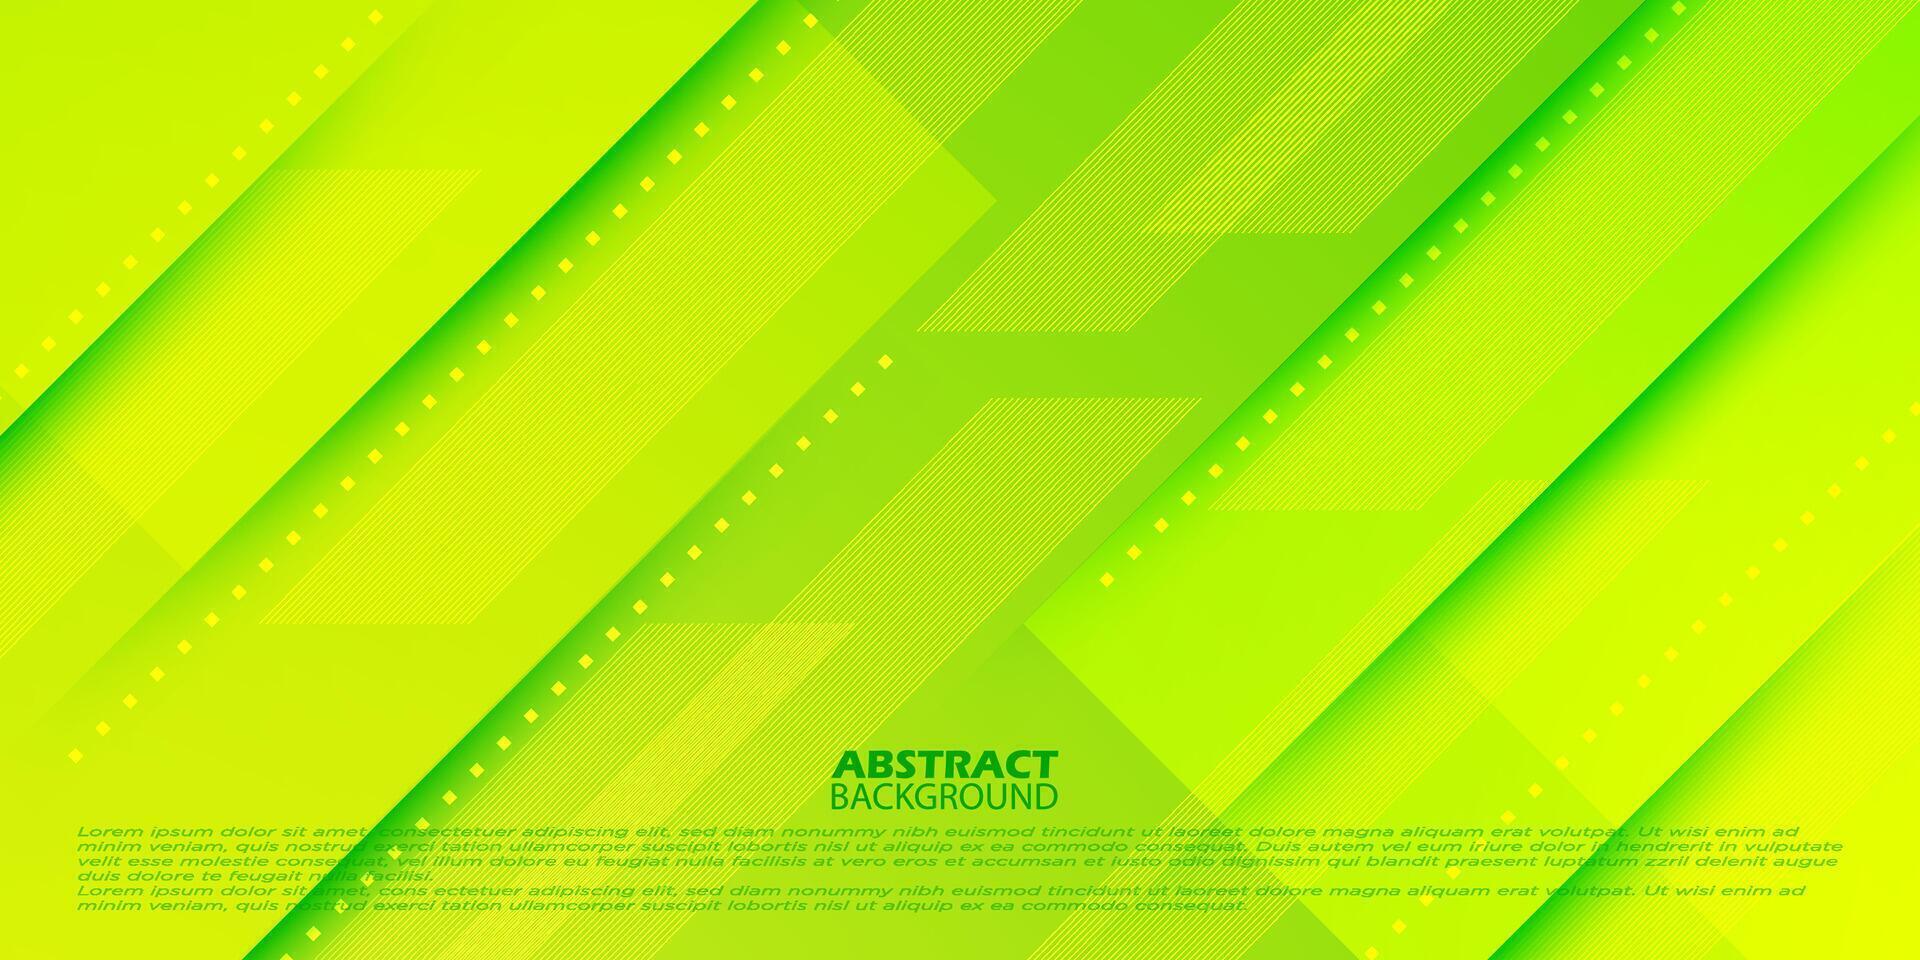 Abstract green lines background. Overlap template vector with overlay lines and shapes. Colorful green background with shadow pattern design. Eps10 vector